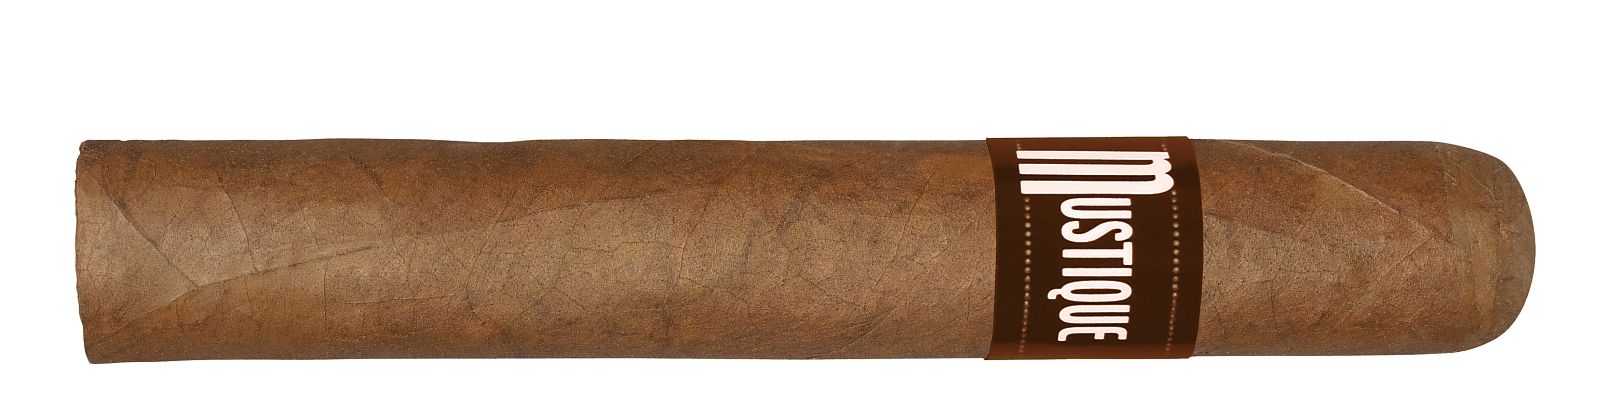 Mustique Amber Robusto